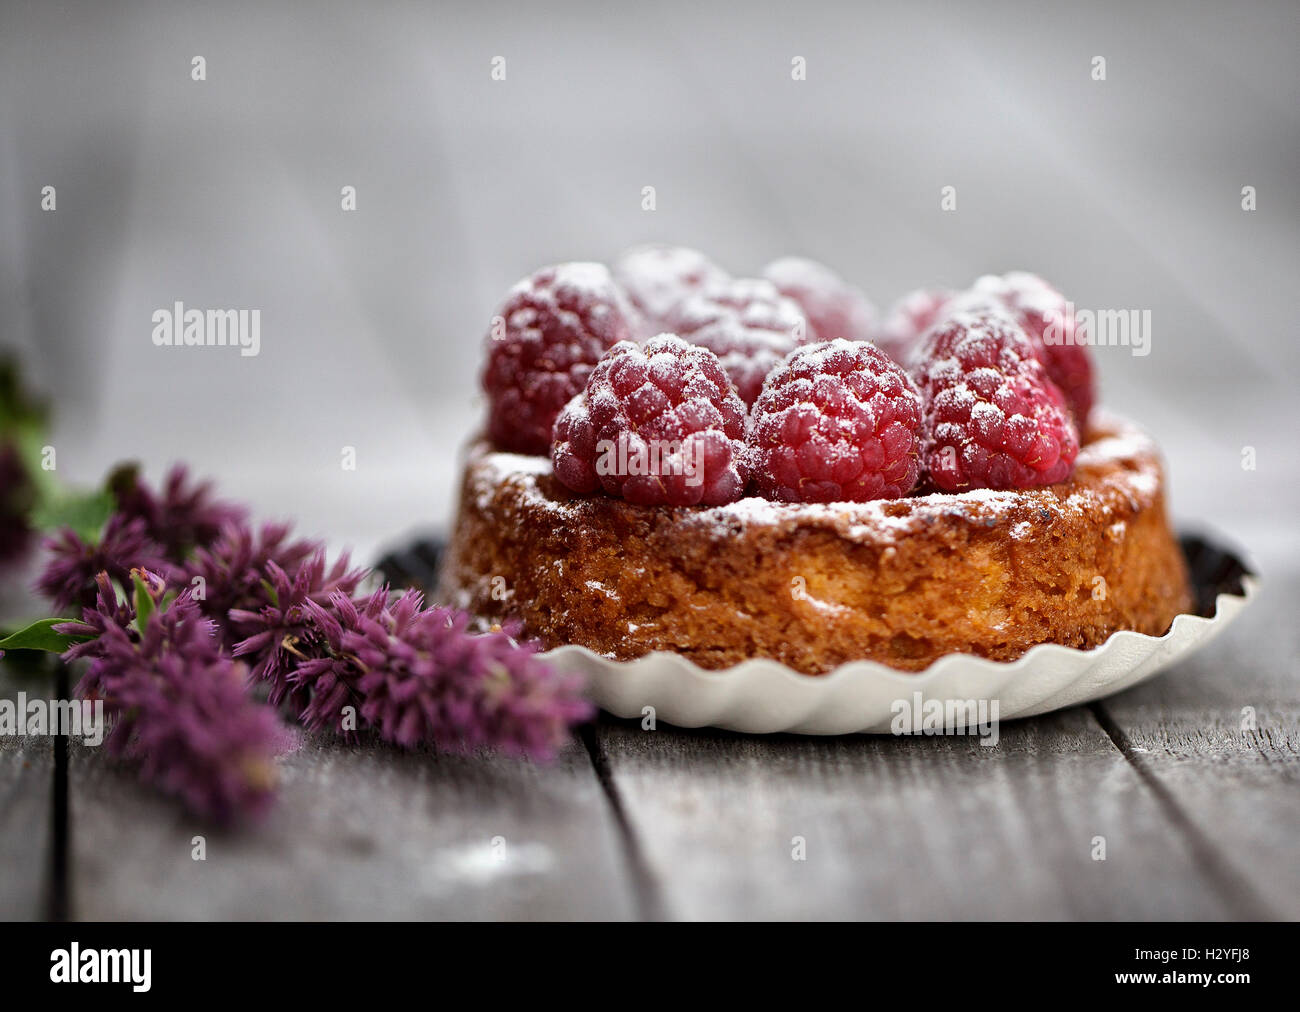 Food Still Life with Raspberry tarte and fresh Lavender on rustic wooden table Stock Photo